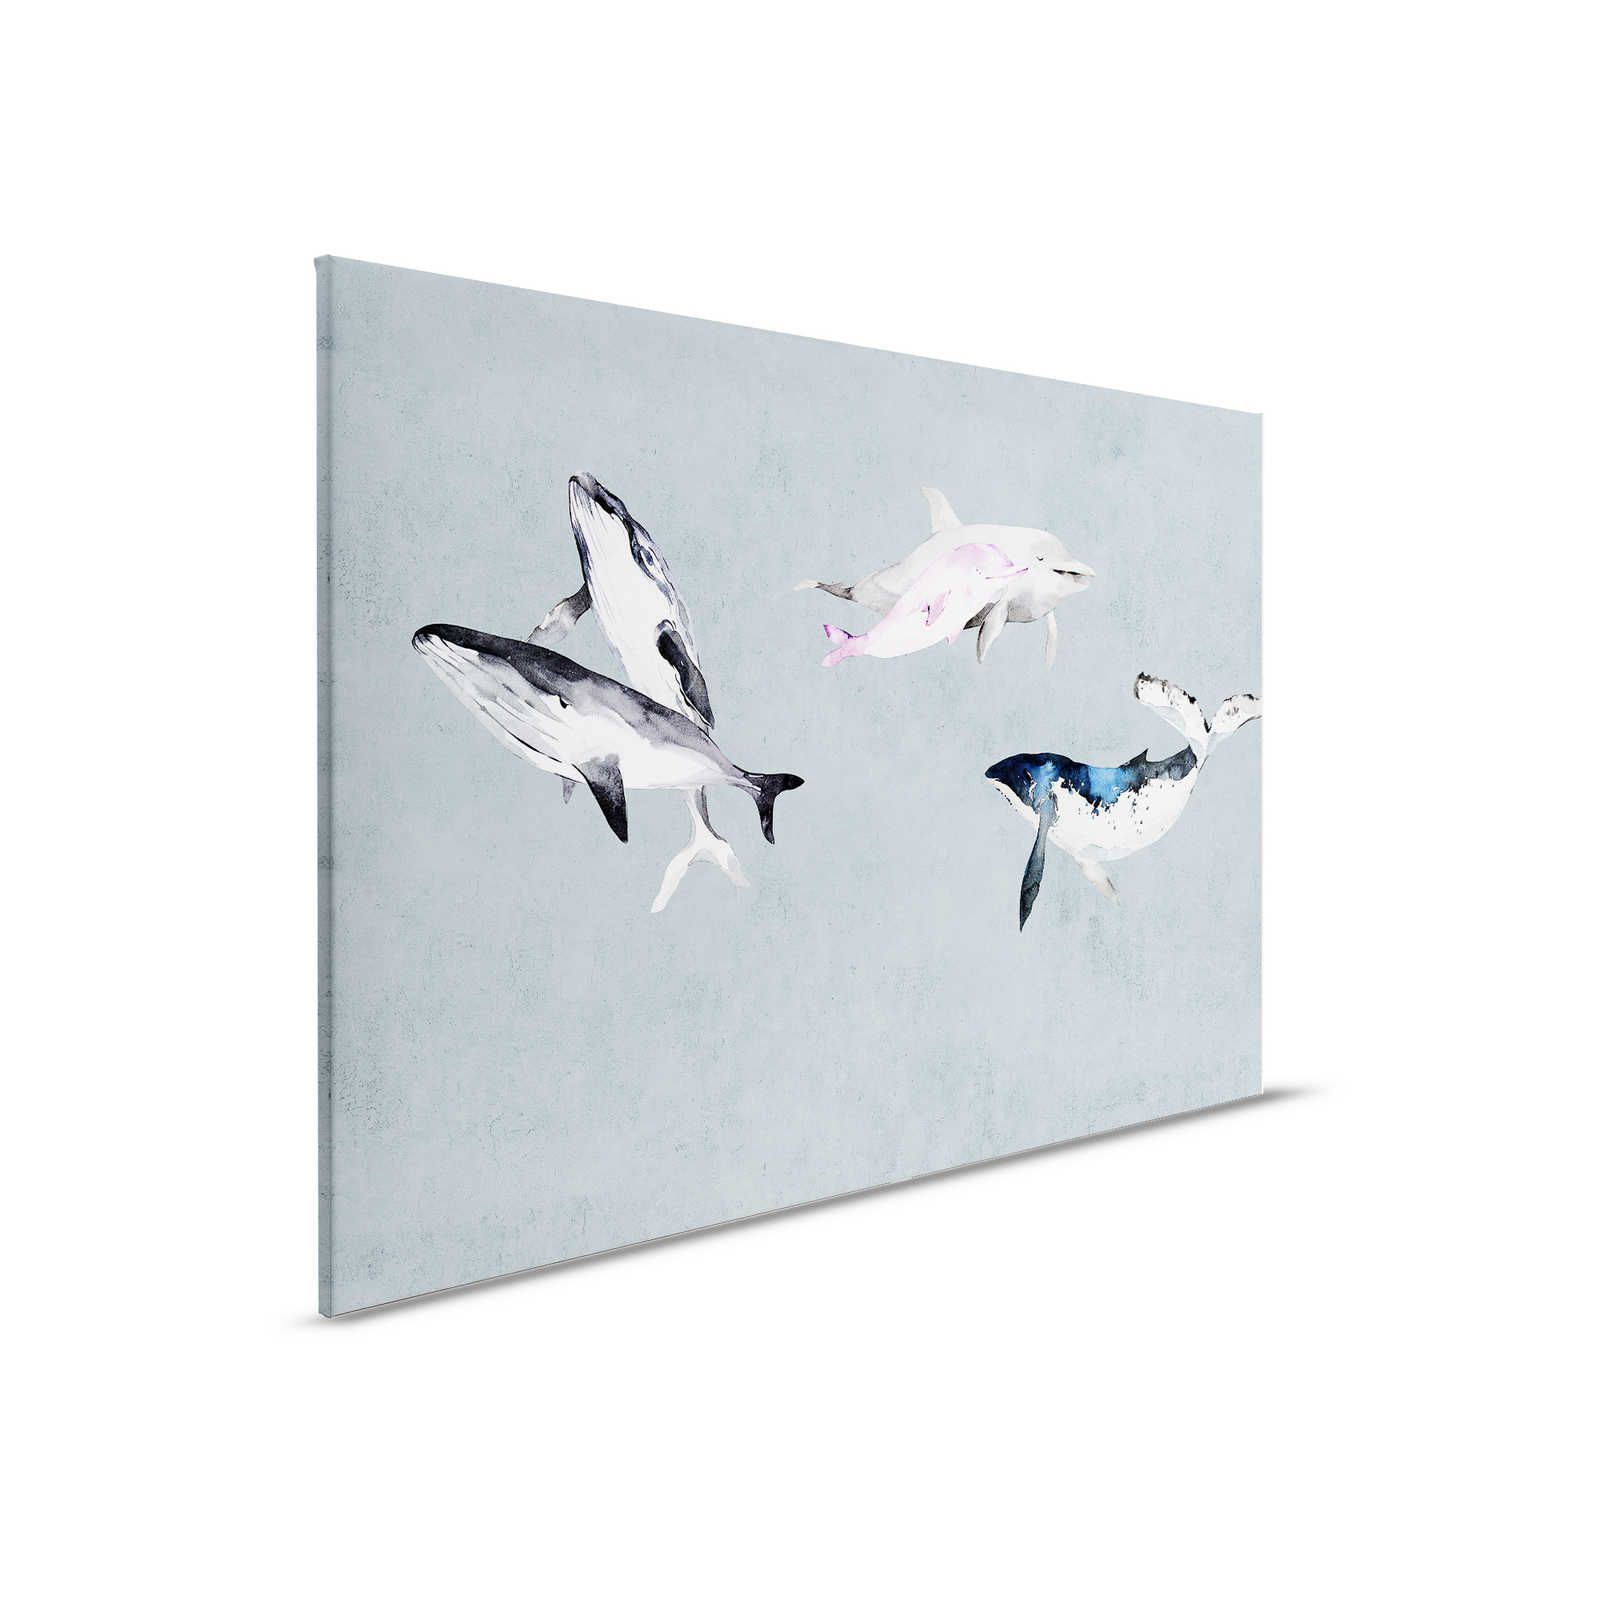 Oceans Five 1 - Canvas painting Whales & Dolphins in watercolour style - 0,90 m x 0,60 m
